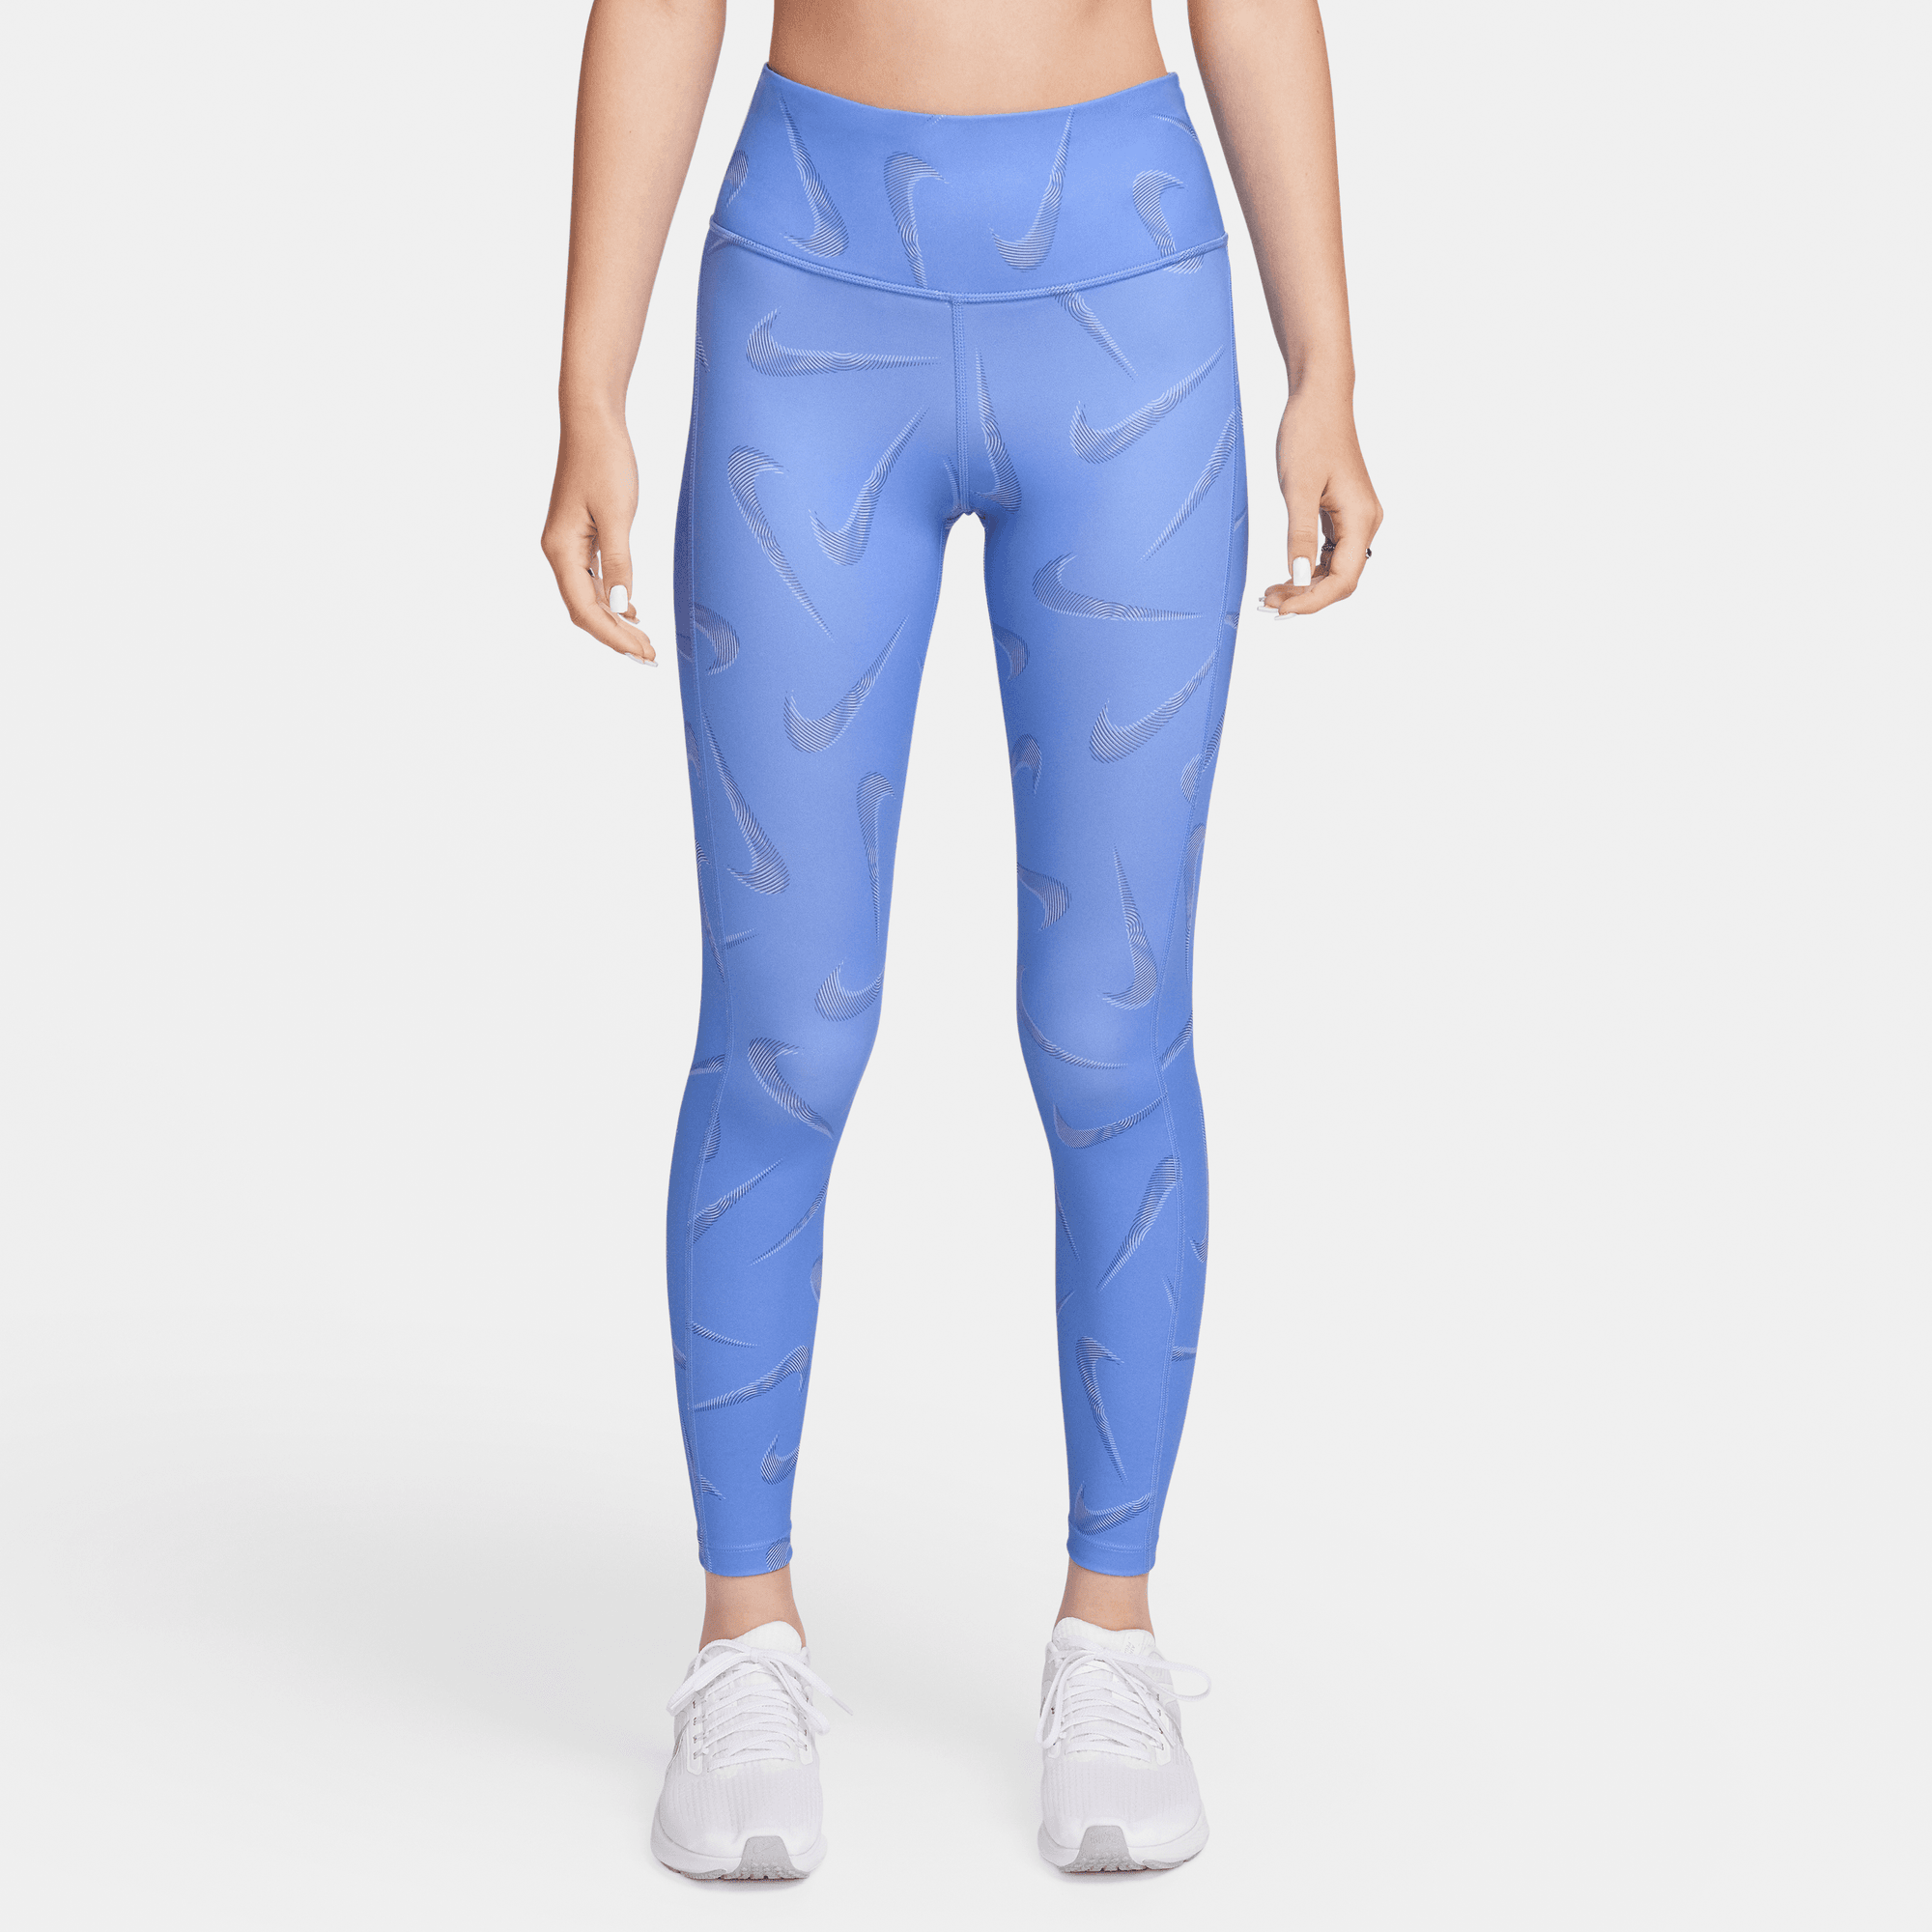 Nike Fast Women's Mid-Rise 7/8 Graphic Leggings with Pockets. Nike ID